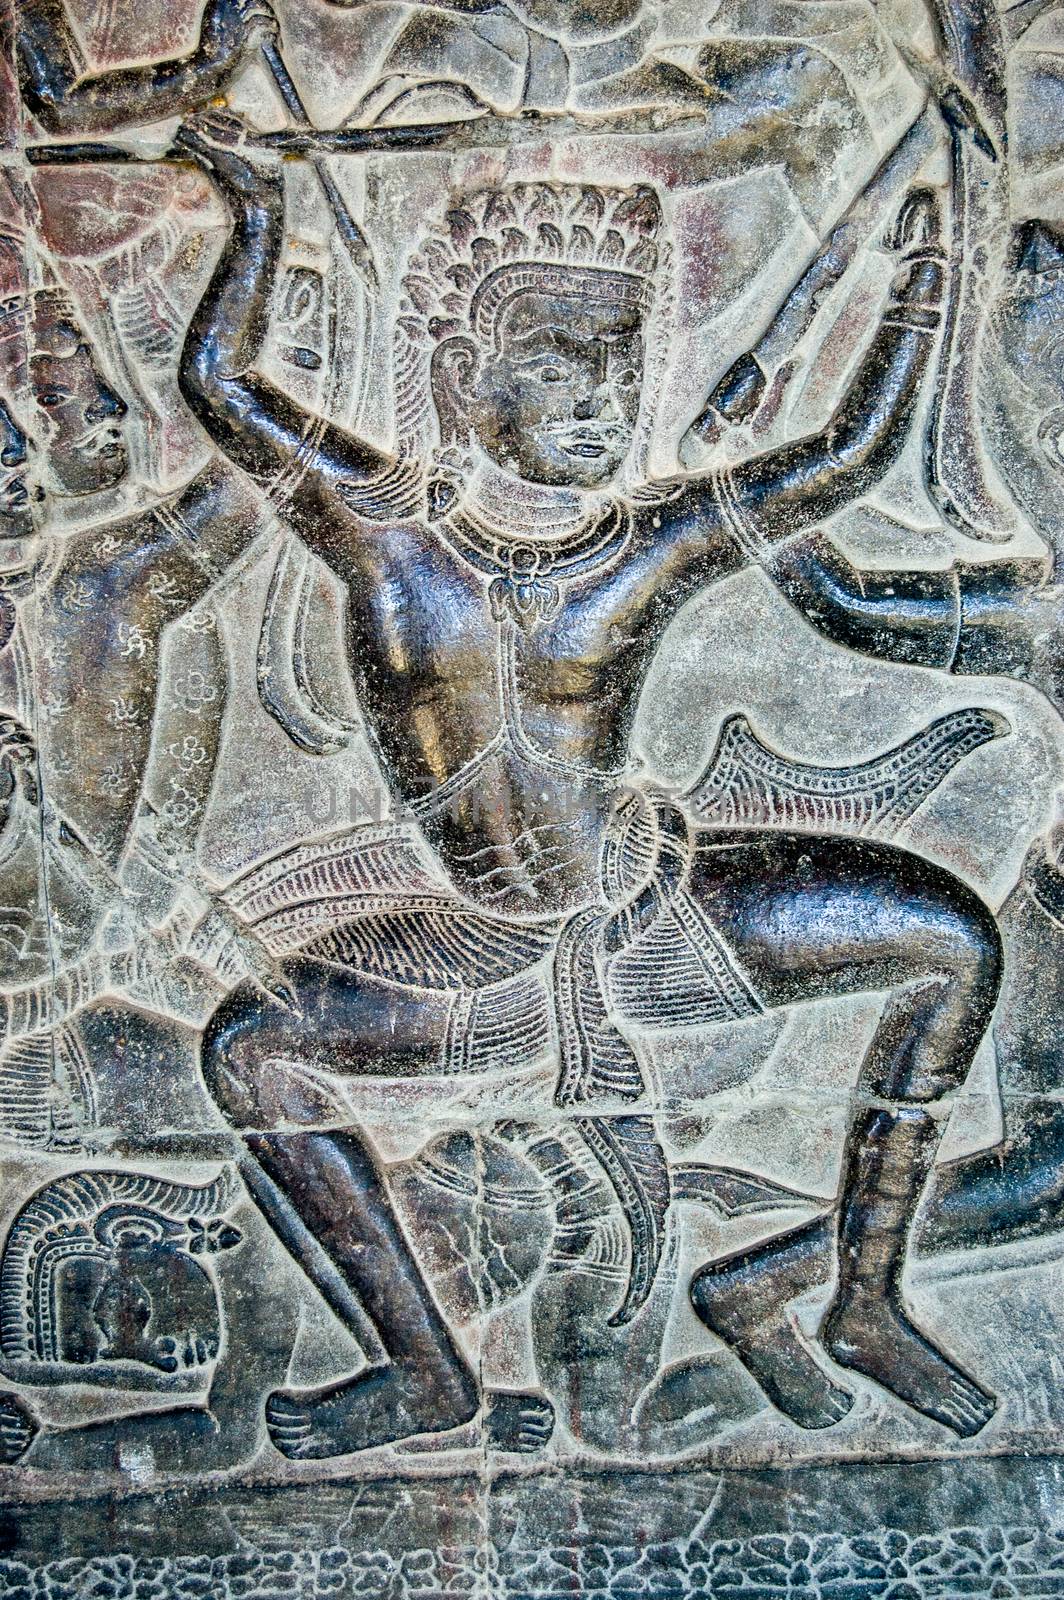 Ancient Khmer bas relief of Kauravaa soldier holding spear in the Battle of Kurukshetra. Wall of Angkor Wat Temple, Siem Reap, Cambodia.